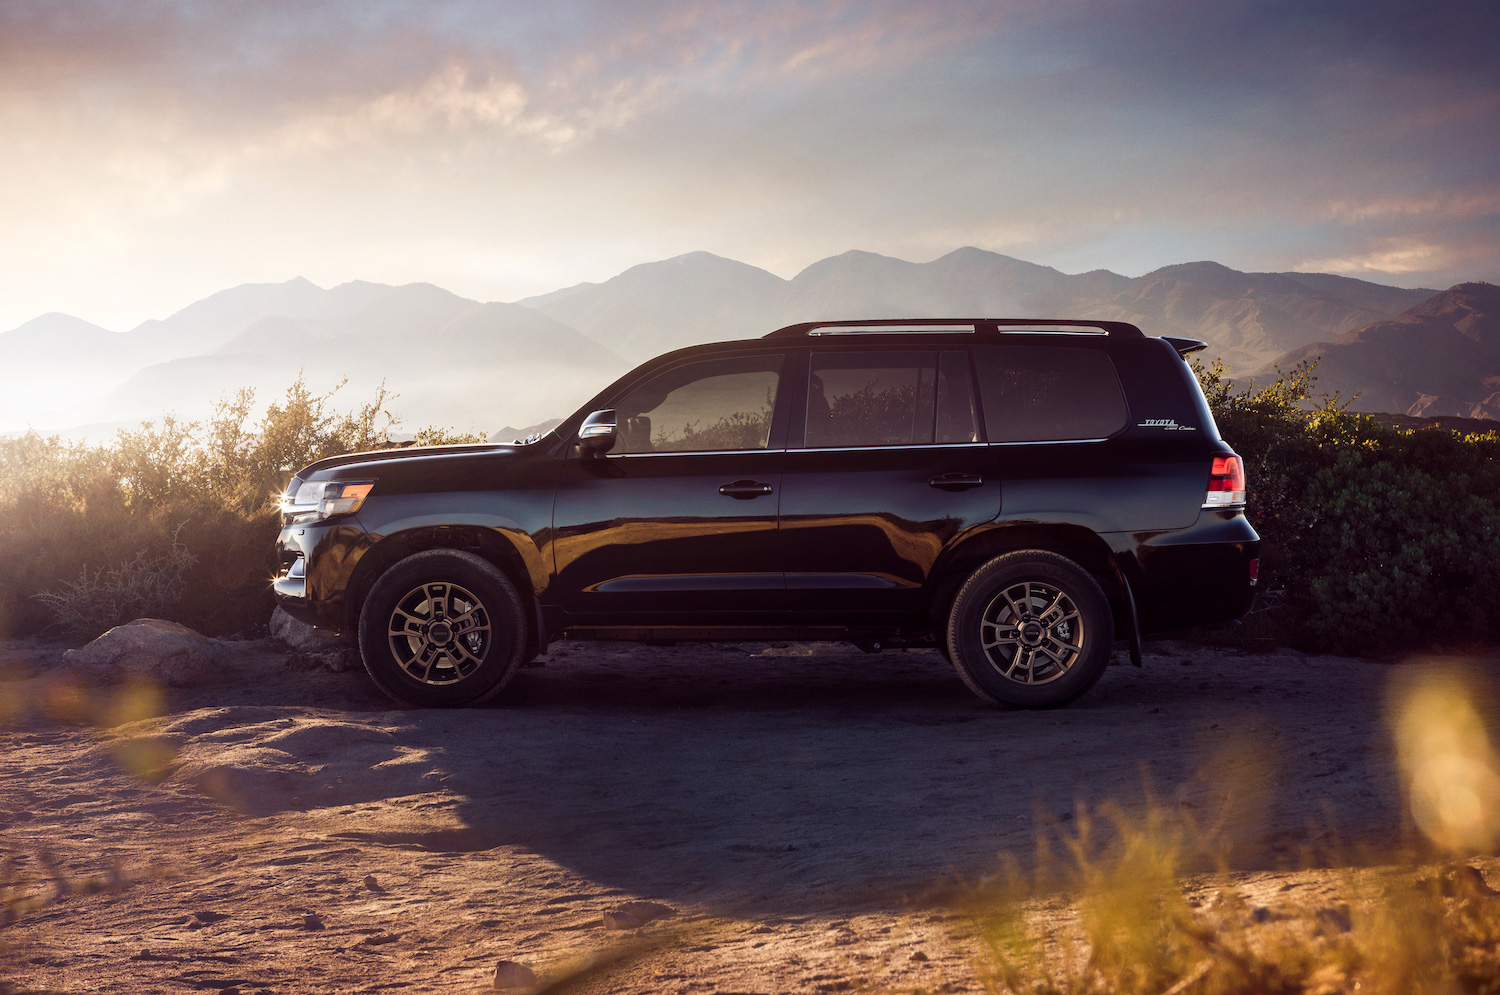 A black Toyota Land Cruiser Heritage Edition parked in the mountains, Toyota is one of the longest-lasting car brands